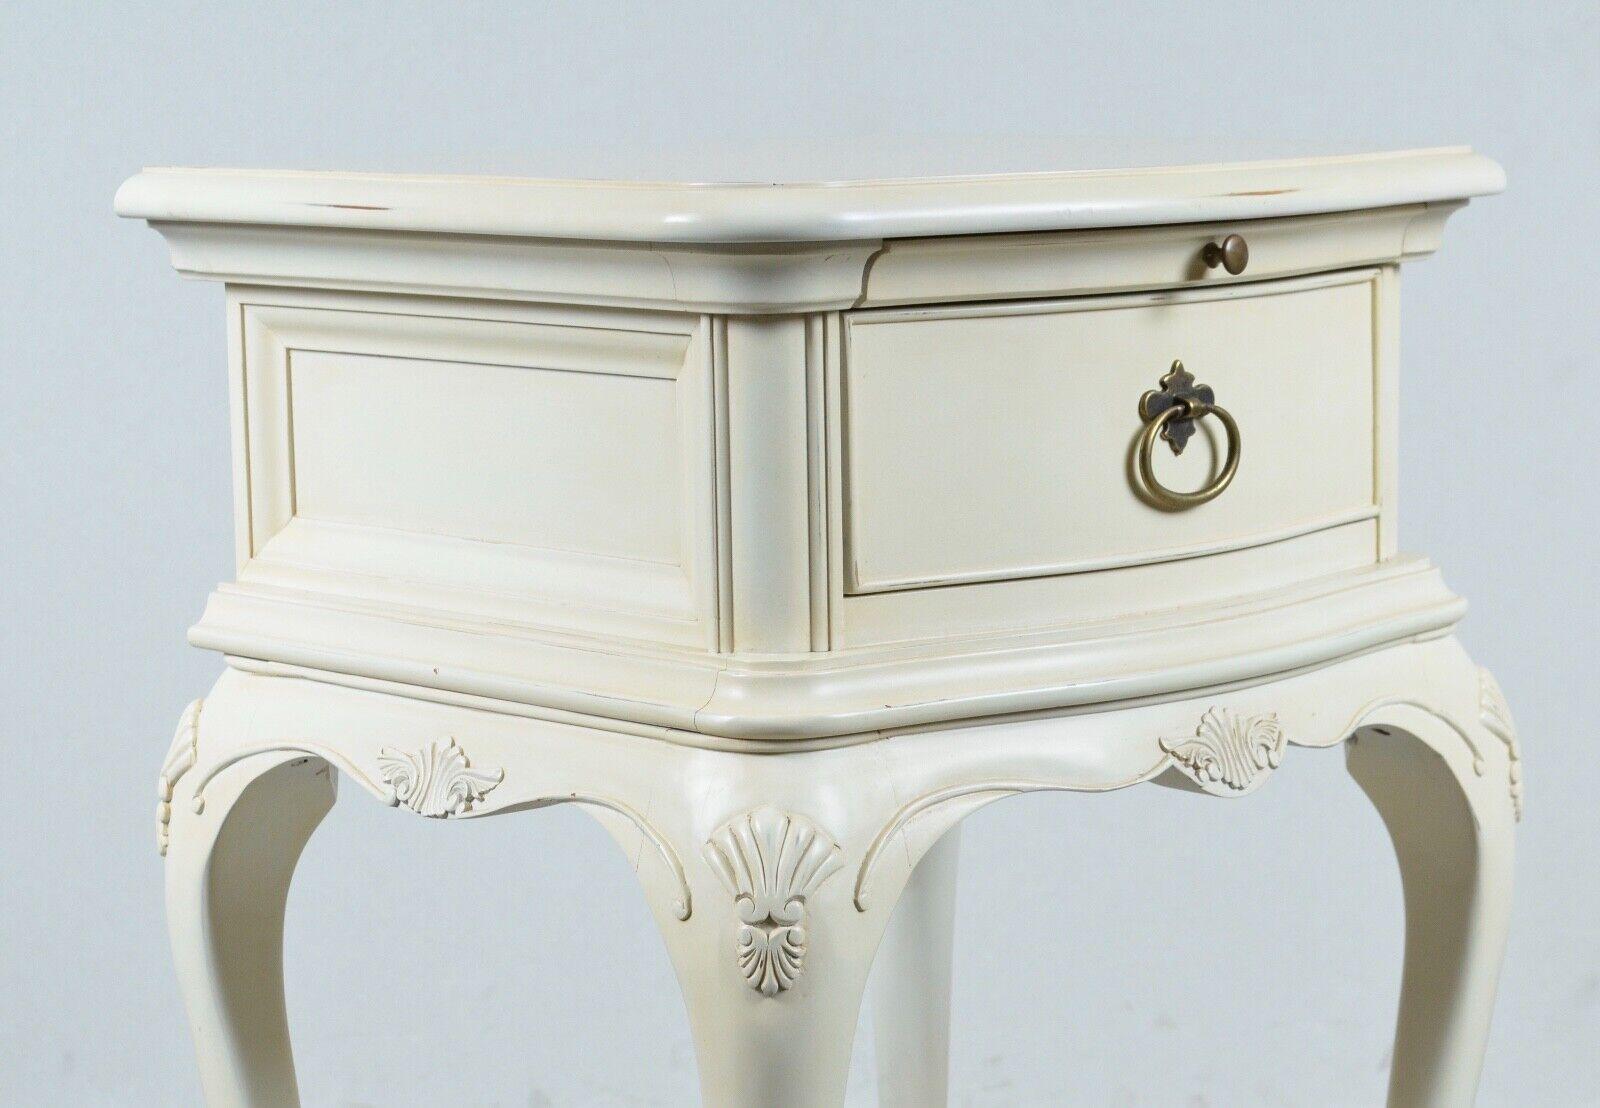 Anglais Rare paire de tables basses WILLIS & GAMBIER IVORY SINGLE DRAWER BEDSiDE NIGHTSTANDS  en vente